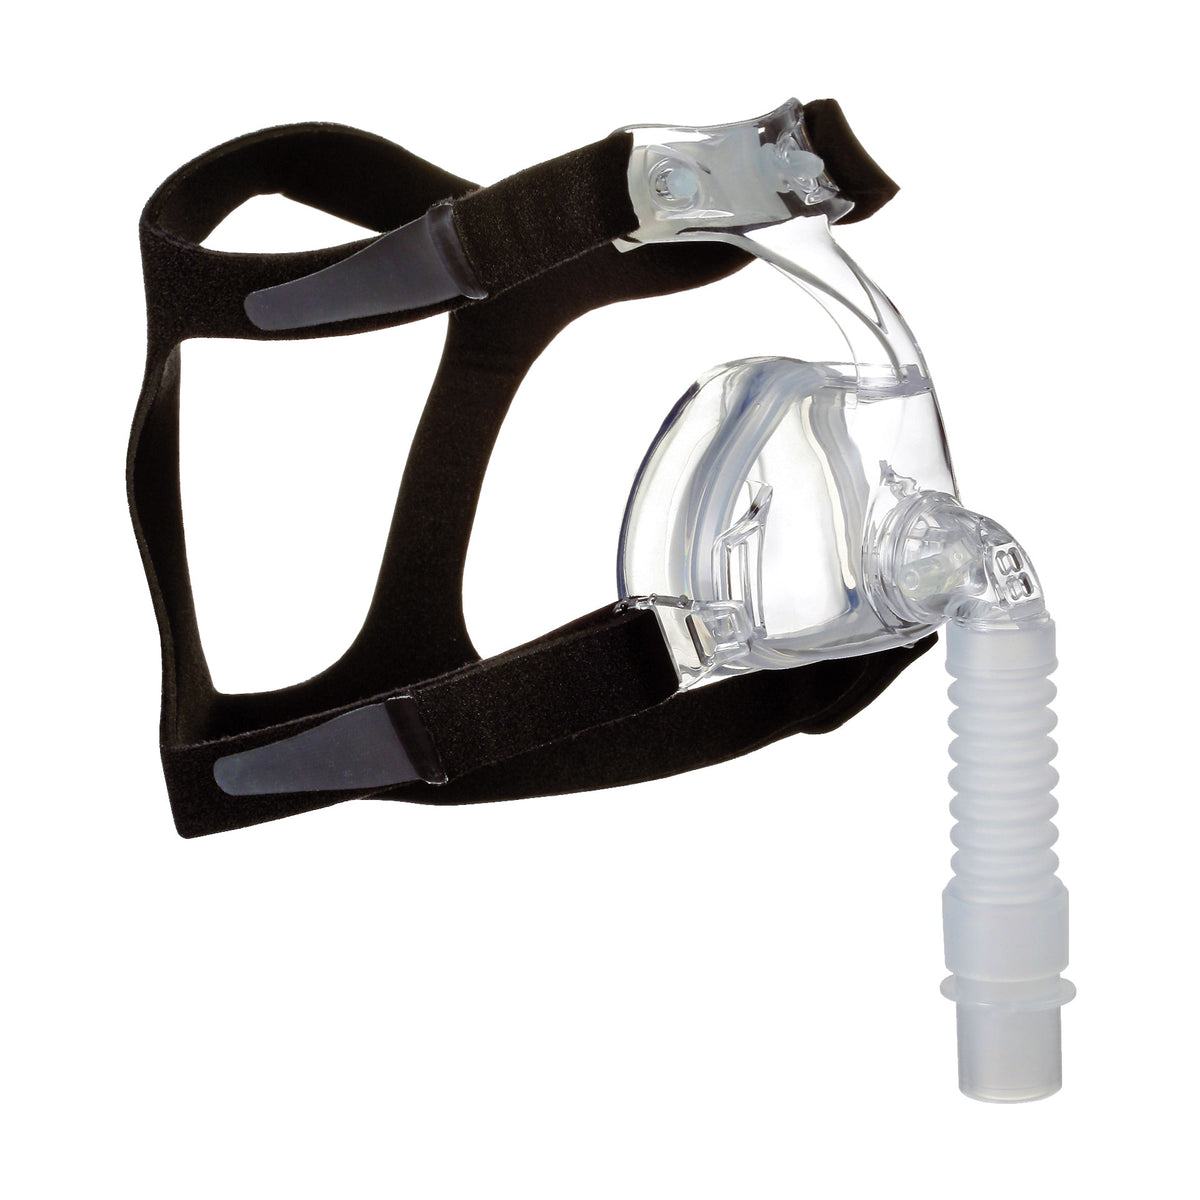 Sunset Deluxe Nasal Mask with Removable Cushion, Headgear and SHS Labeled Bag